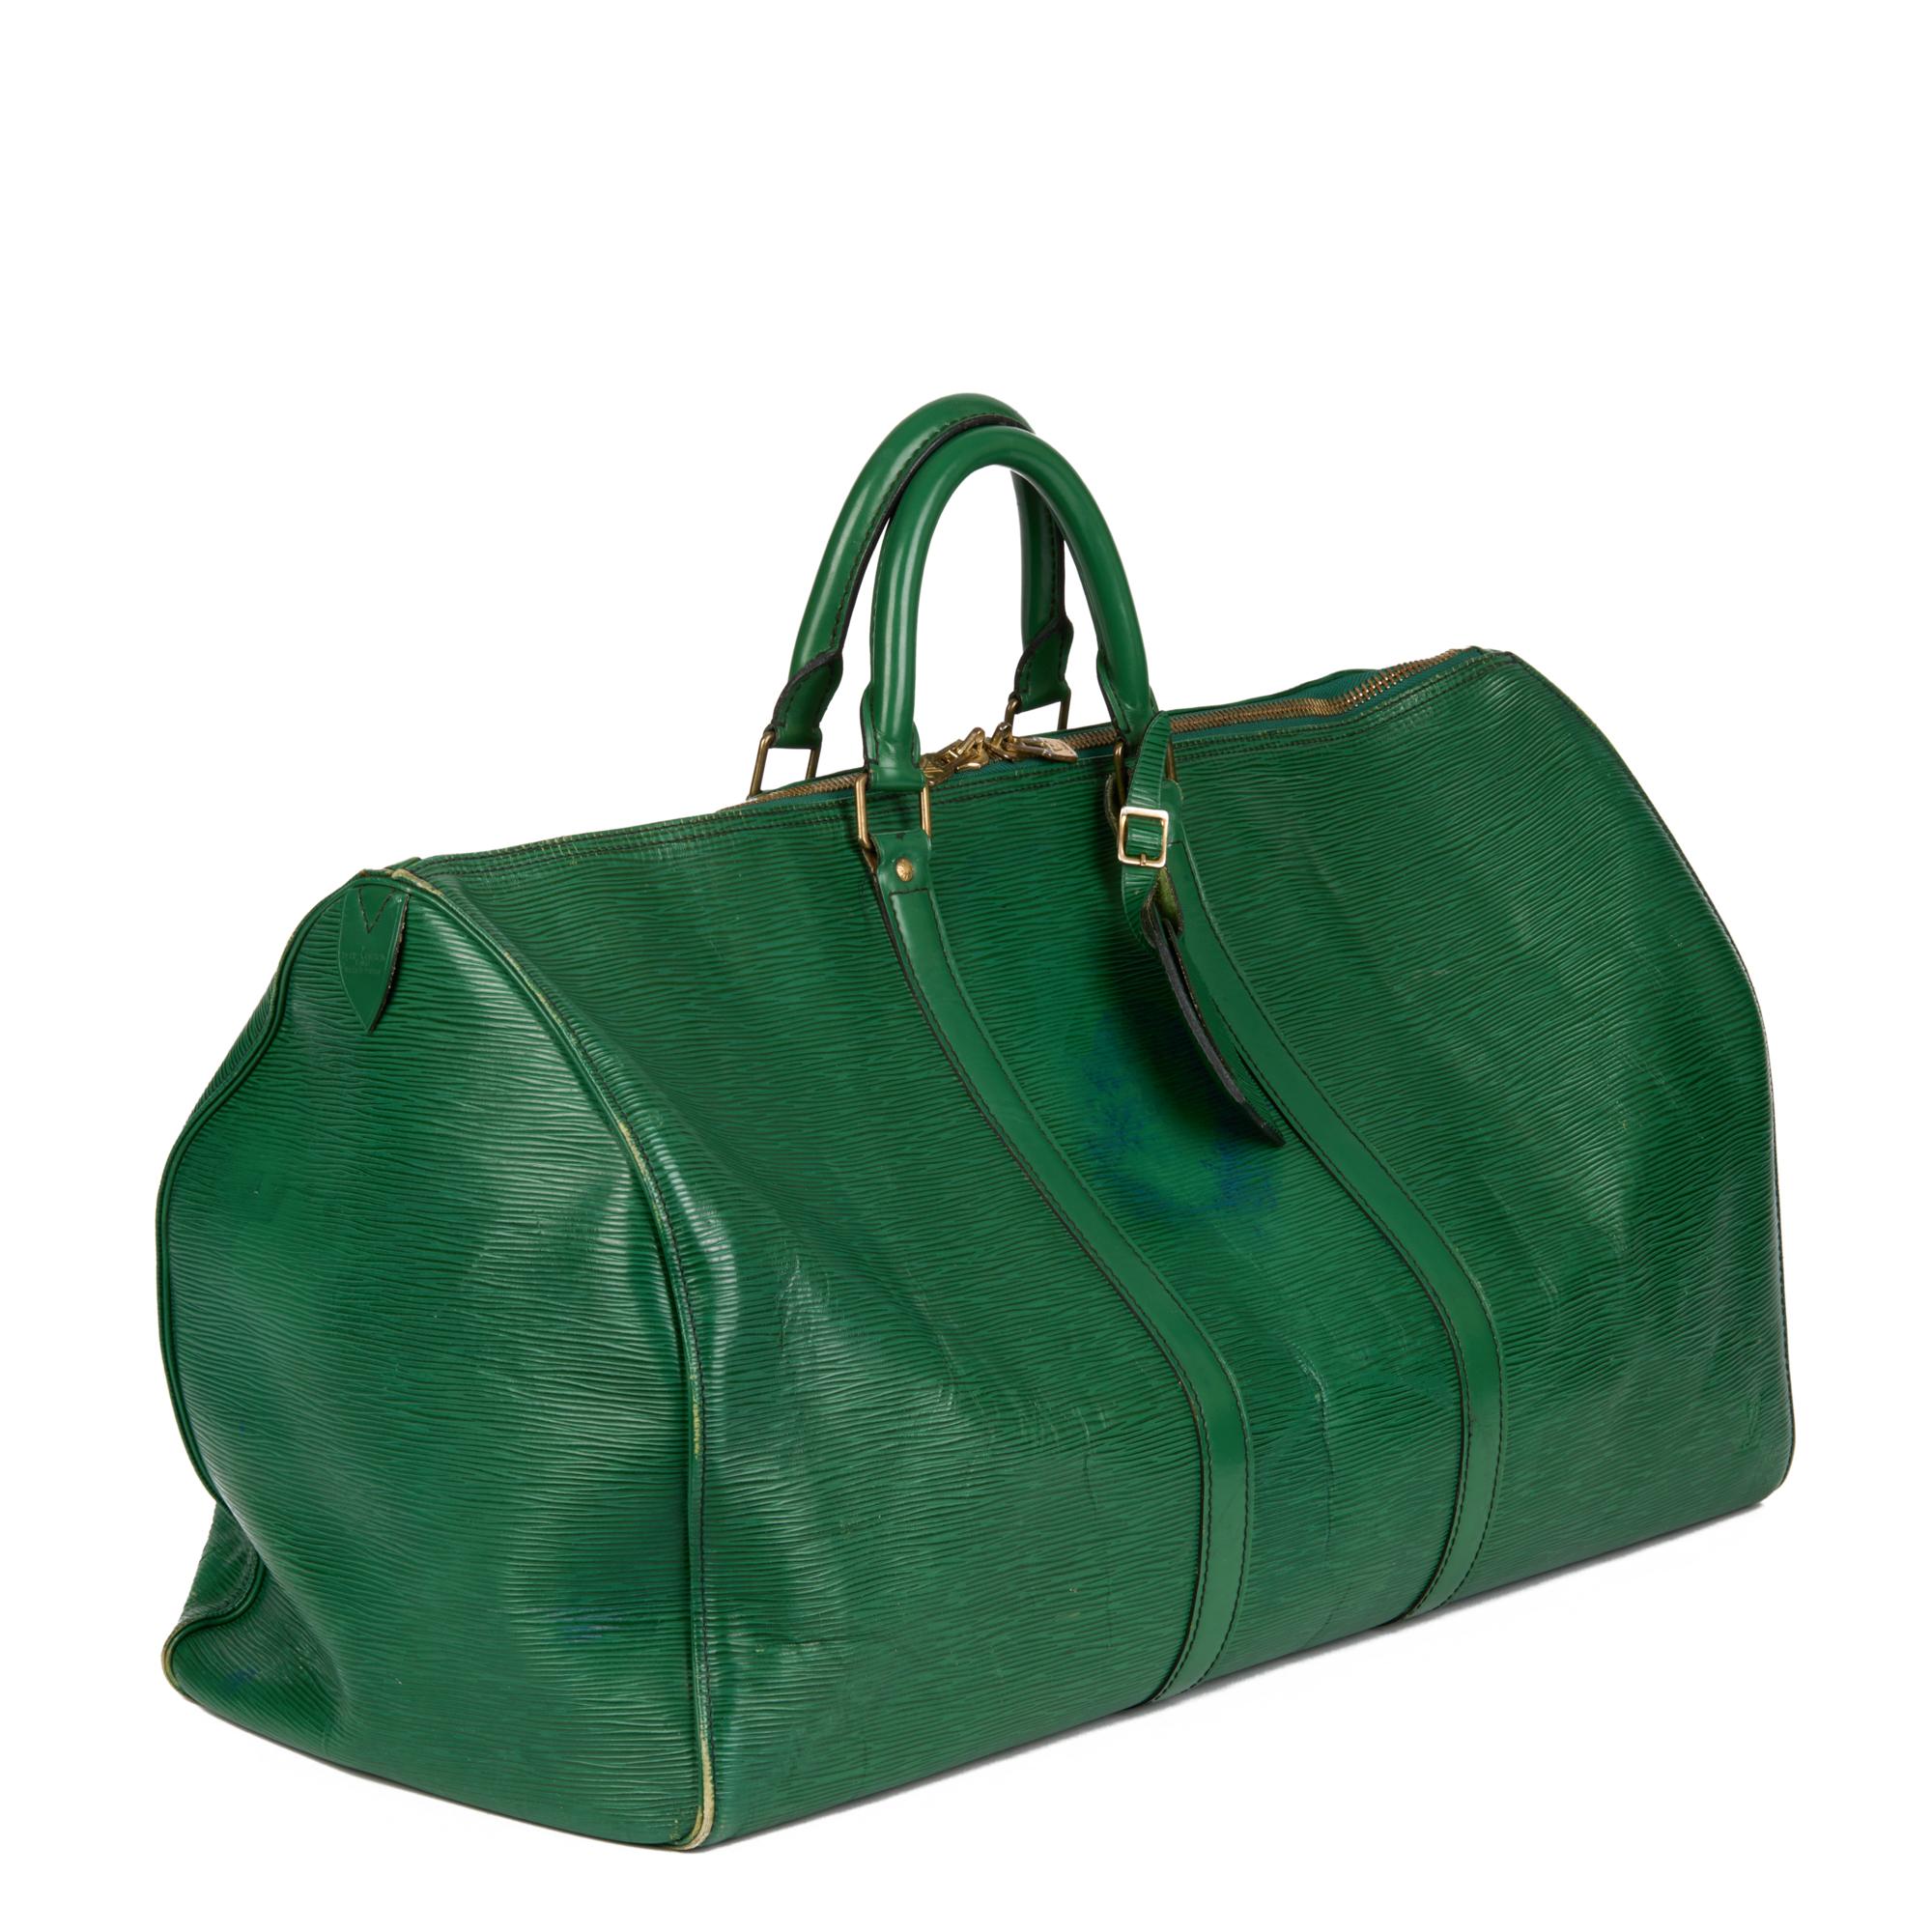 LOUIS VUITTON
Green Epi Leather Vintage Keepall 55

Xupes Reference: CB623
Serial Number: VI8901
Age (Circa): 1991
Authenticity Details: Date Stamp (Made in France)
Gender: Unisex
Type: Travel

Colour: Green
Hardware: Golden Brass
Material(s): Epi